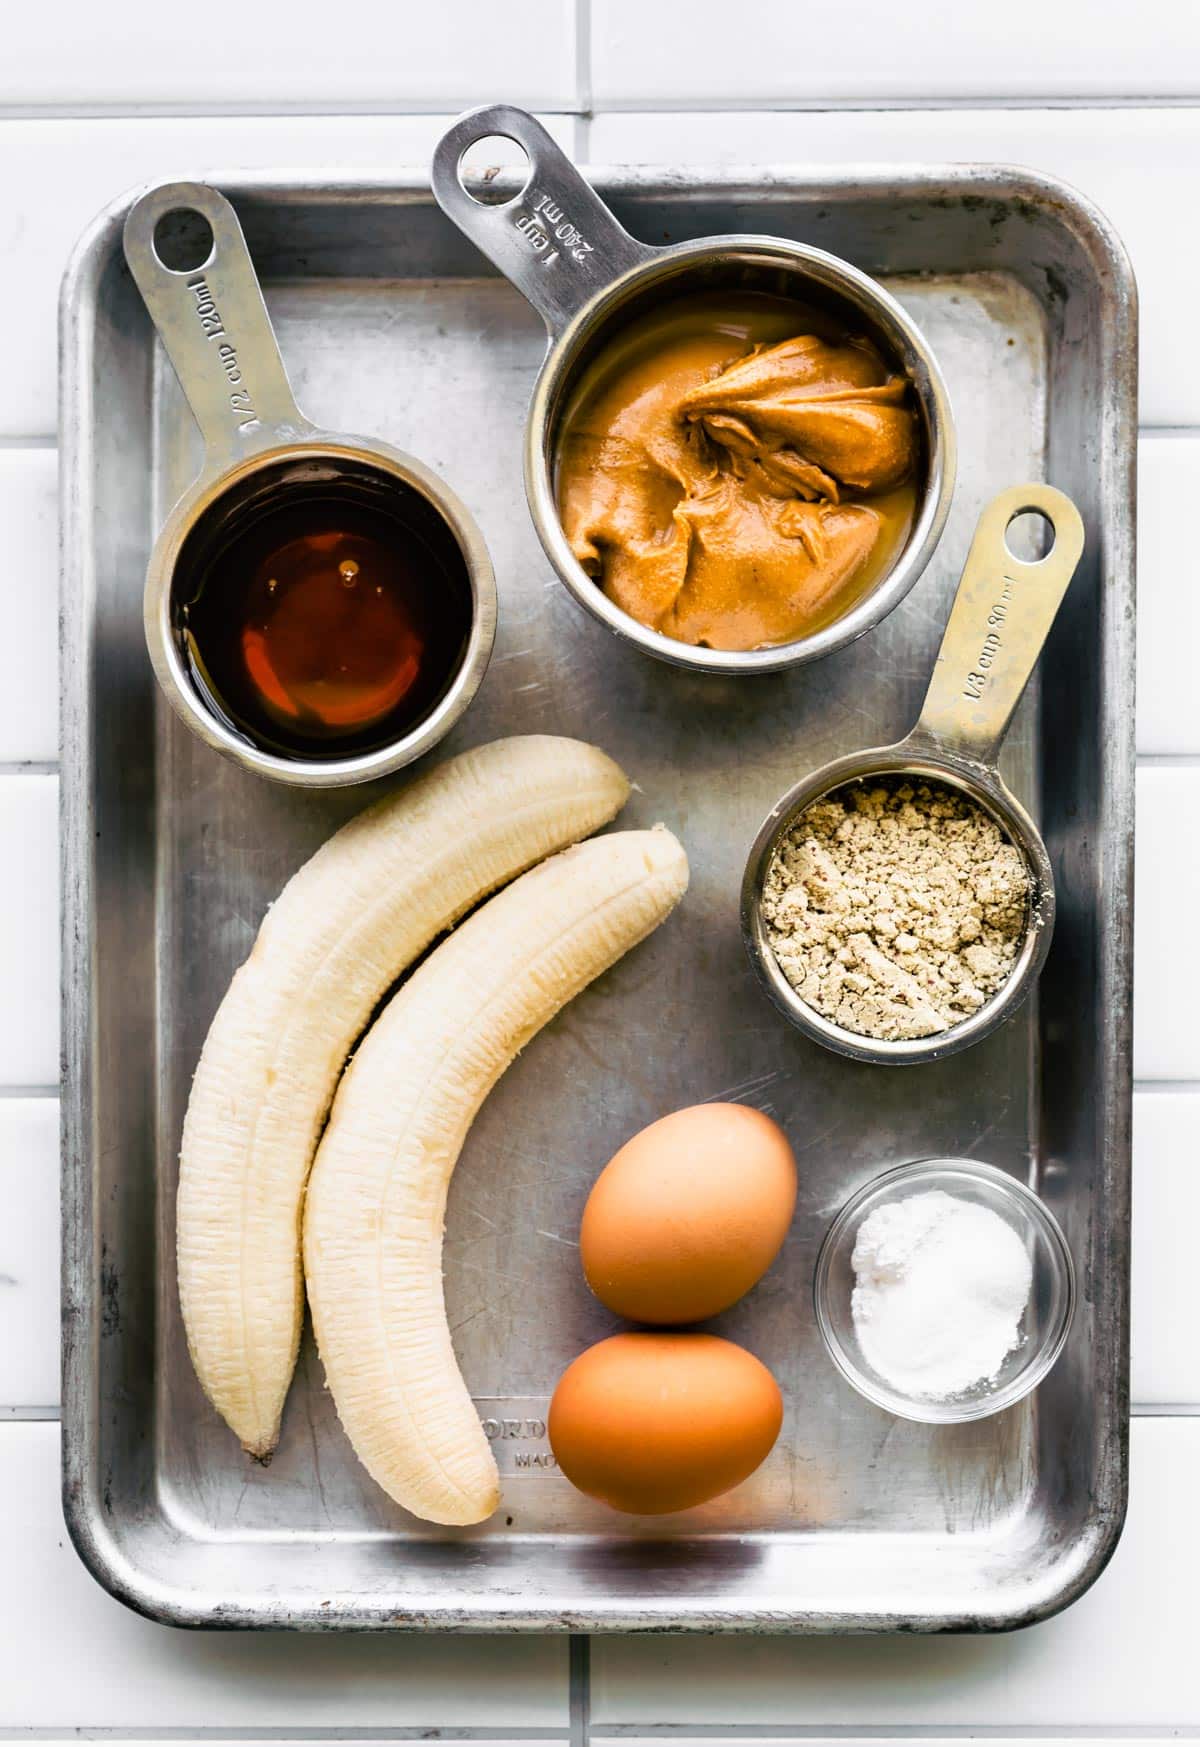 Peanut butter, bananas, maple syrup and eggs on a metal sheet pan.